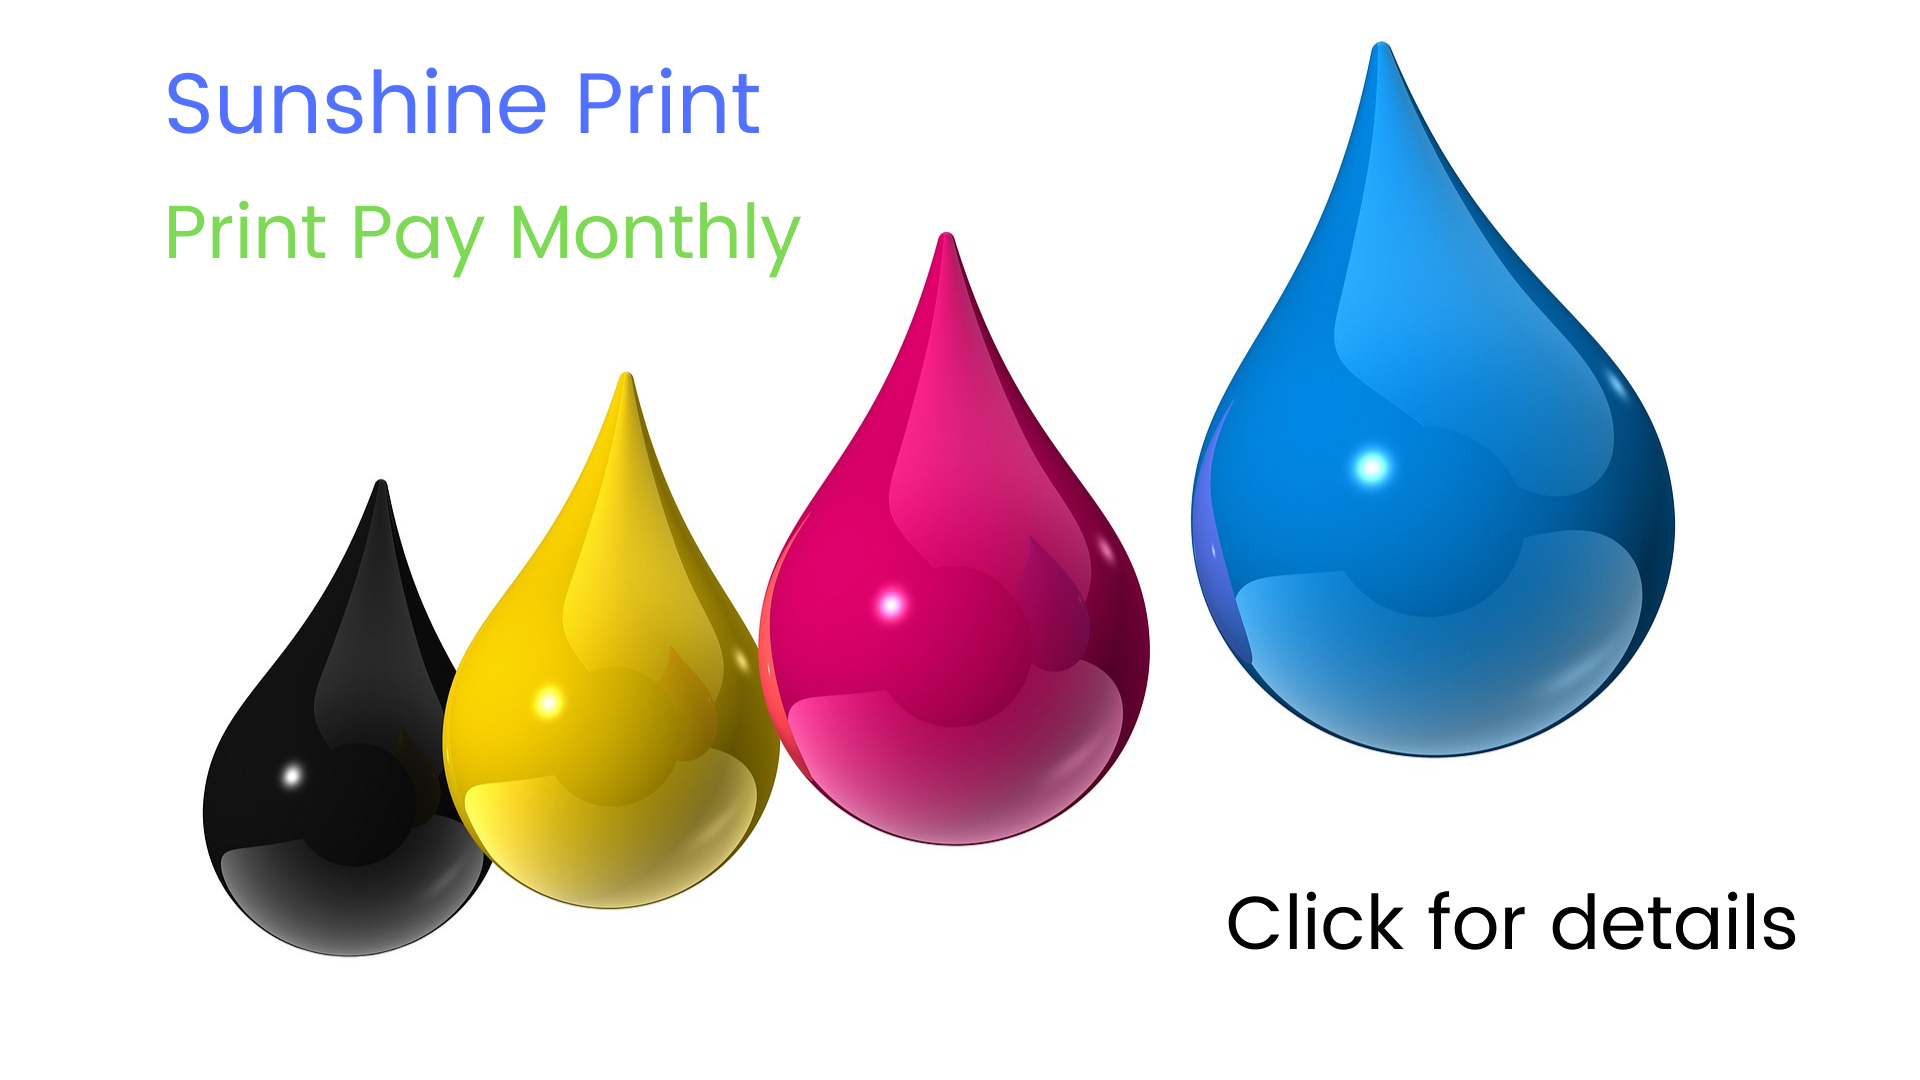 Print Pay Monthly